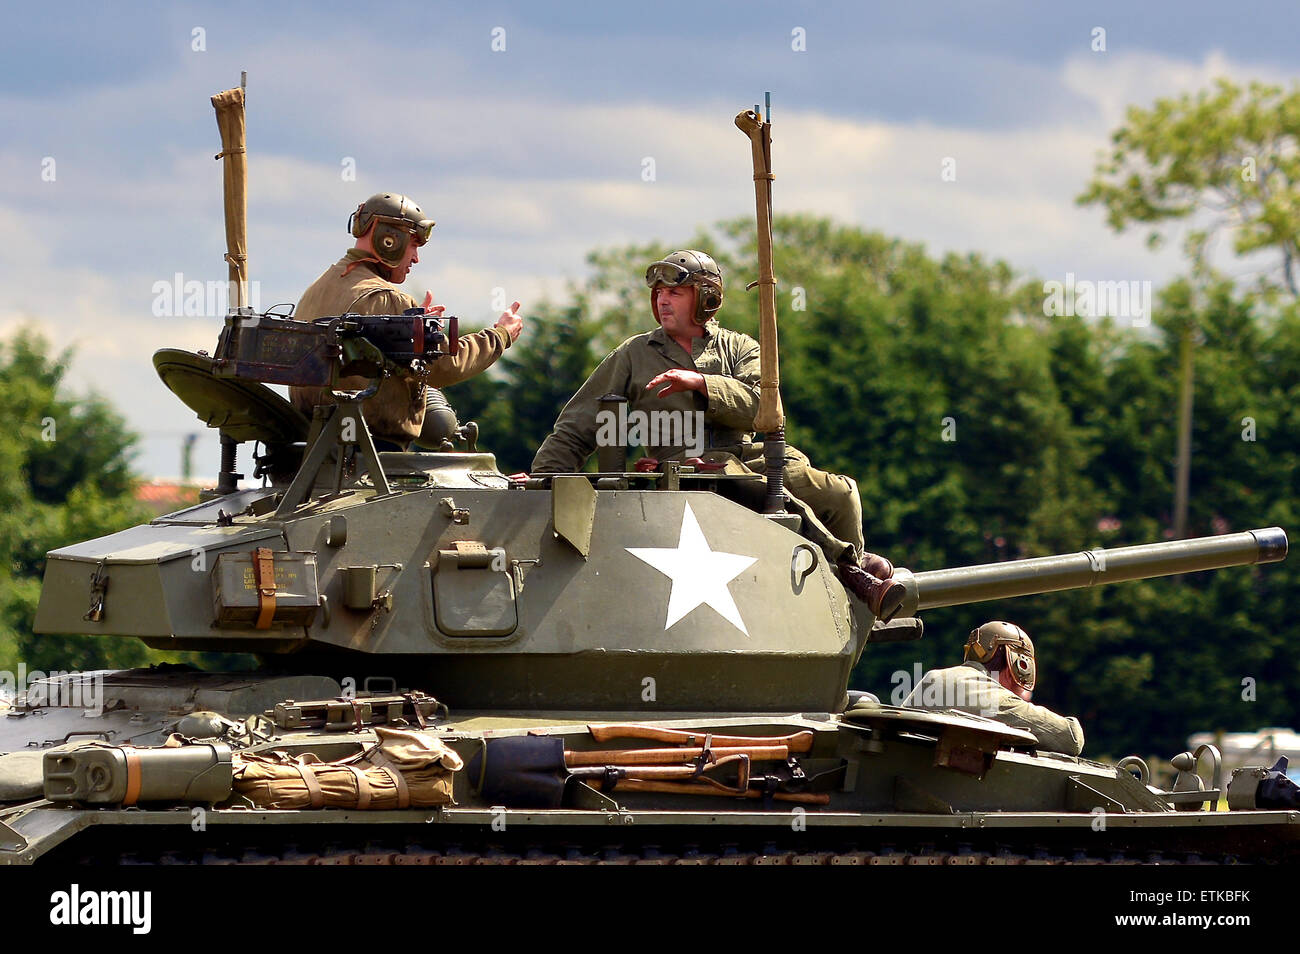 World War Two American Chaffee Tank and crew, World War Two tank display at the Croft Nostalgia Festival in Darlington Sat 5 - Sun 6 August 2016 Stock Photo